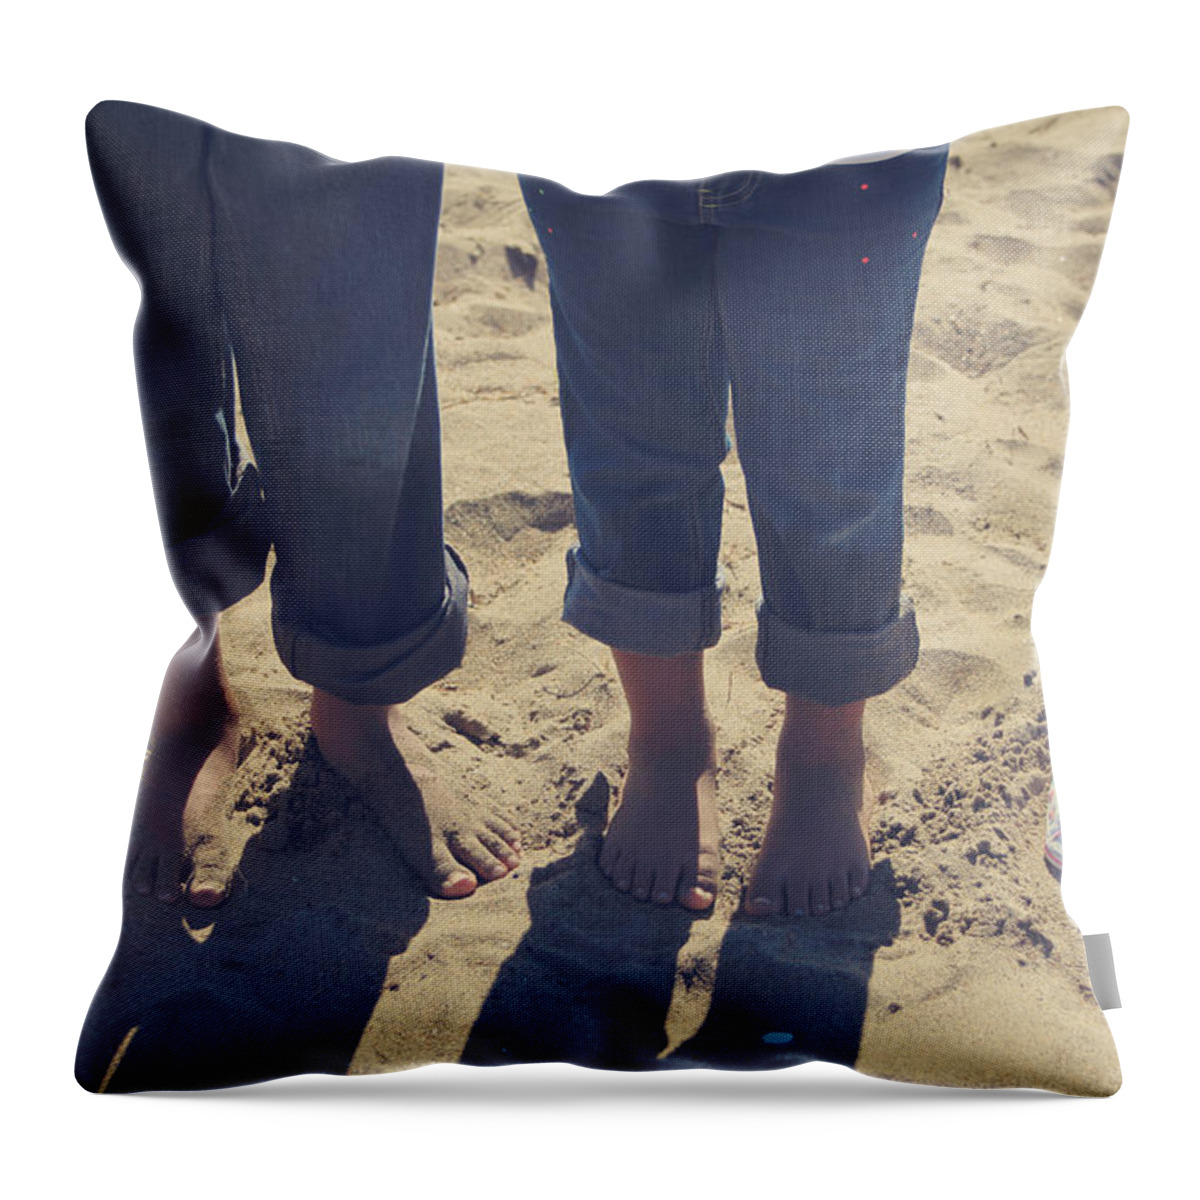 Kids Throw Pillow featuring the photograph Small Smaller Smallest by Laurie Search